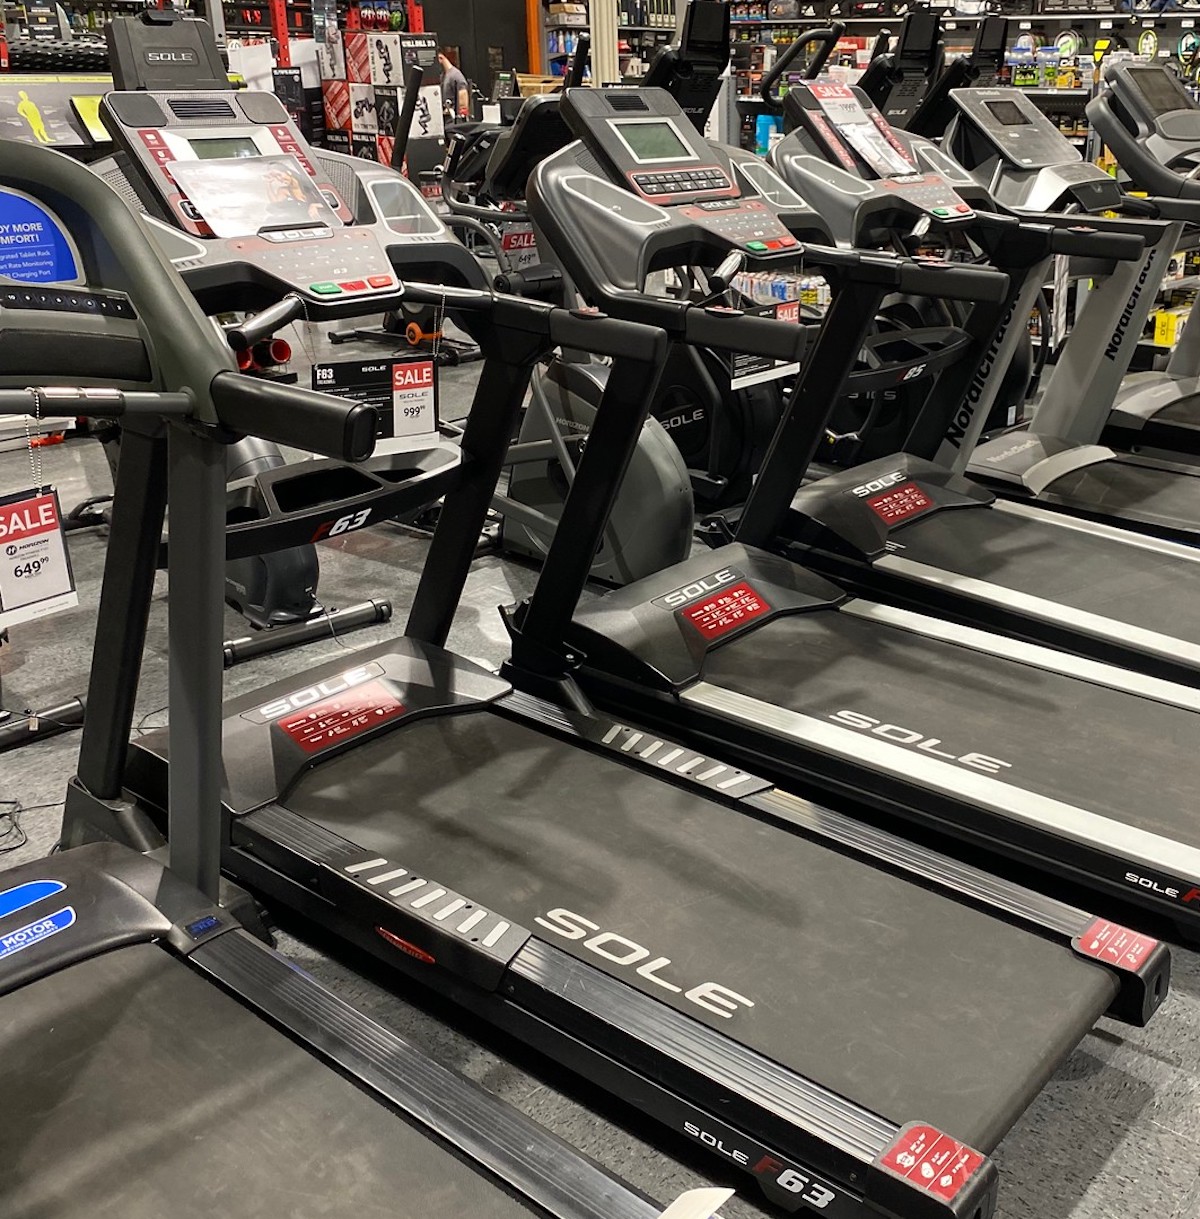 Sole 63 treadmill on display at Dicks Sporting Goods